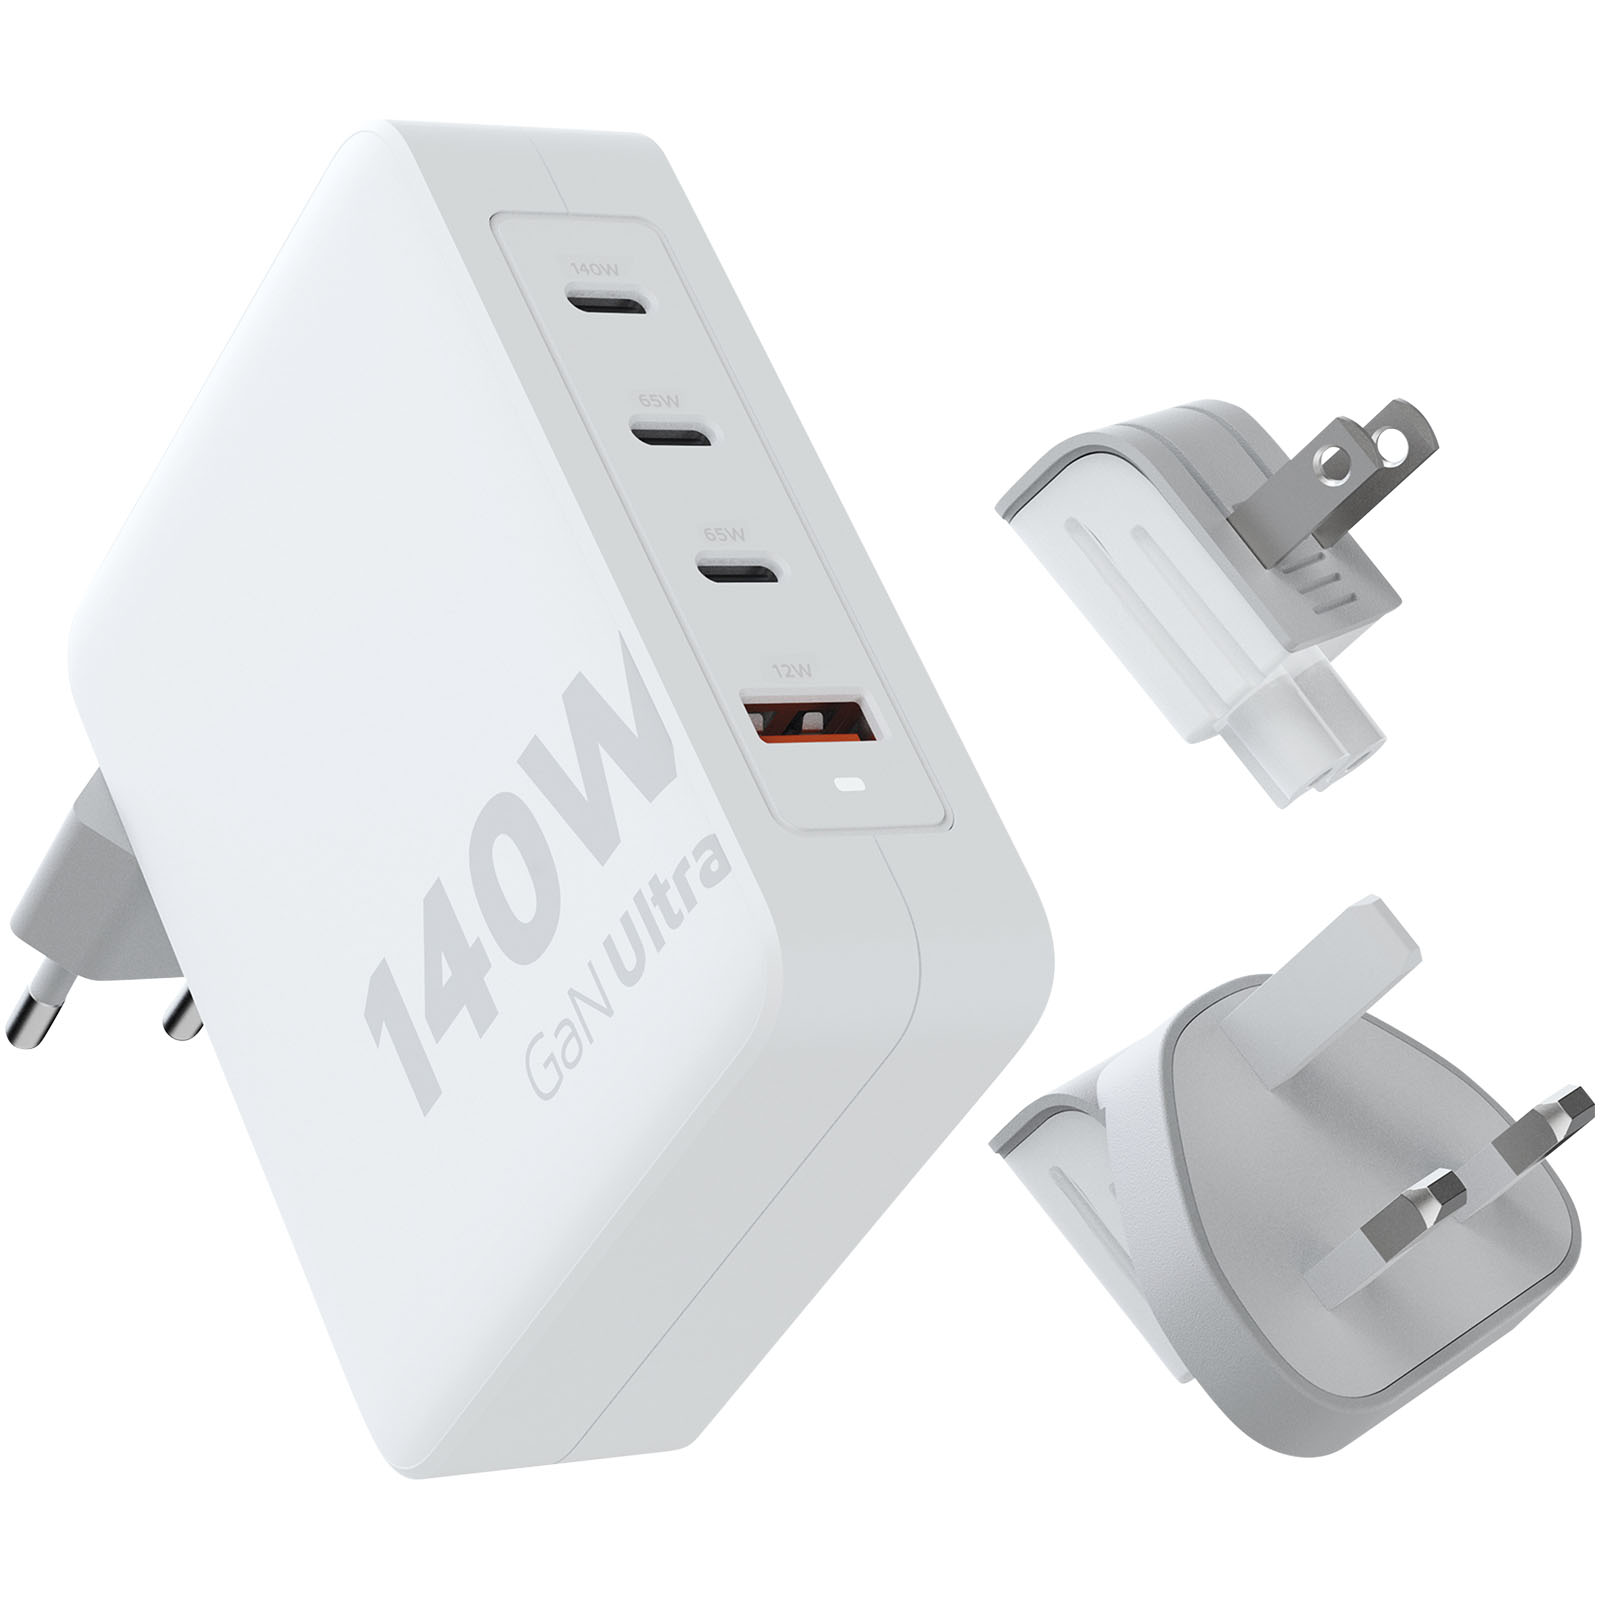 Advertising Chargers - Xtorm XVC2140 GaN Ultra 140W travel charger with 240W USB-C PD cable - 0